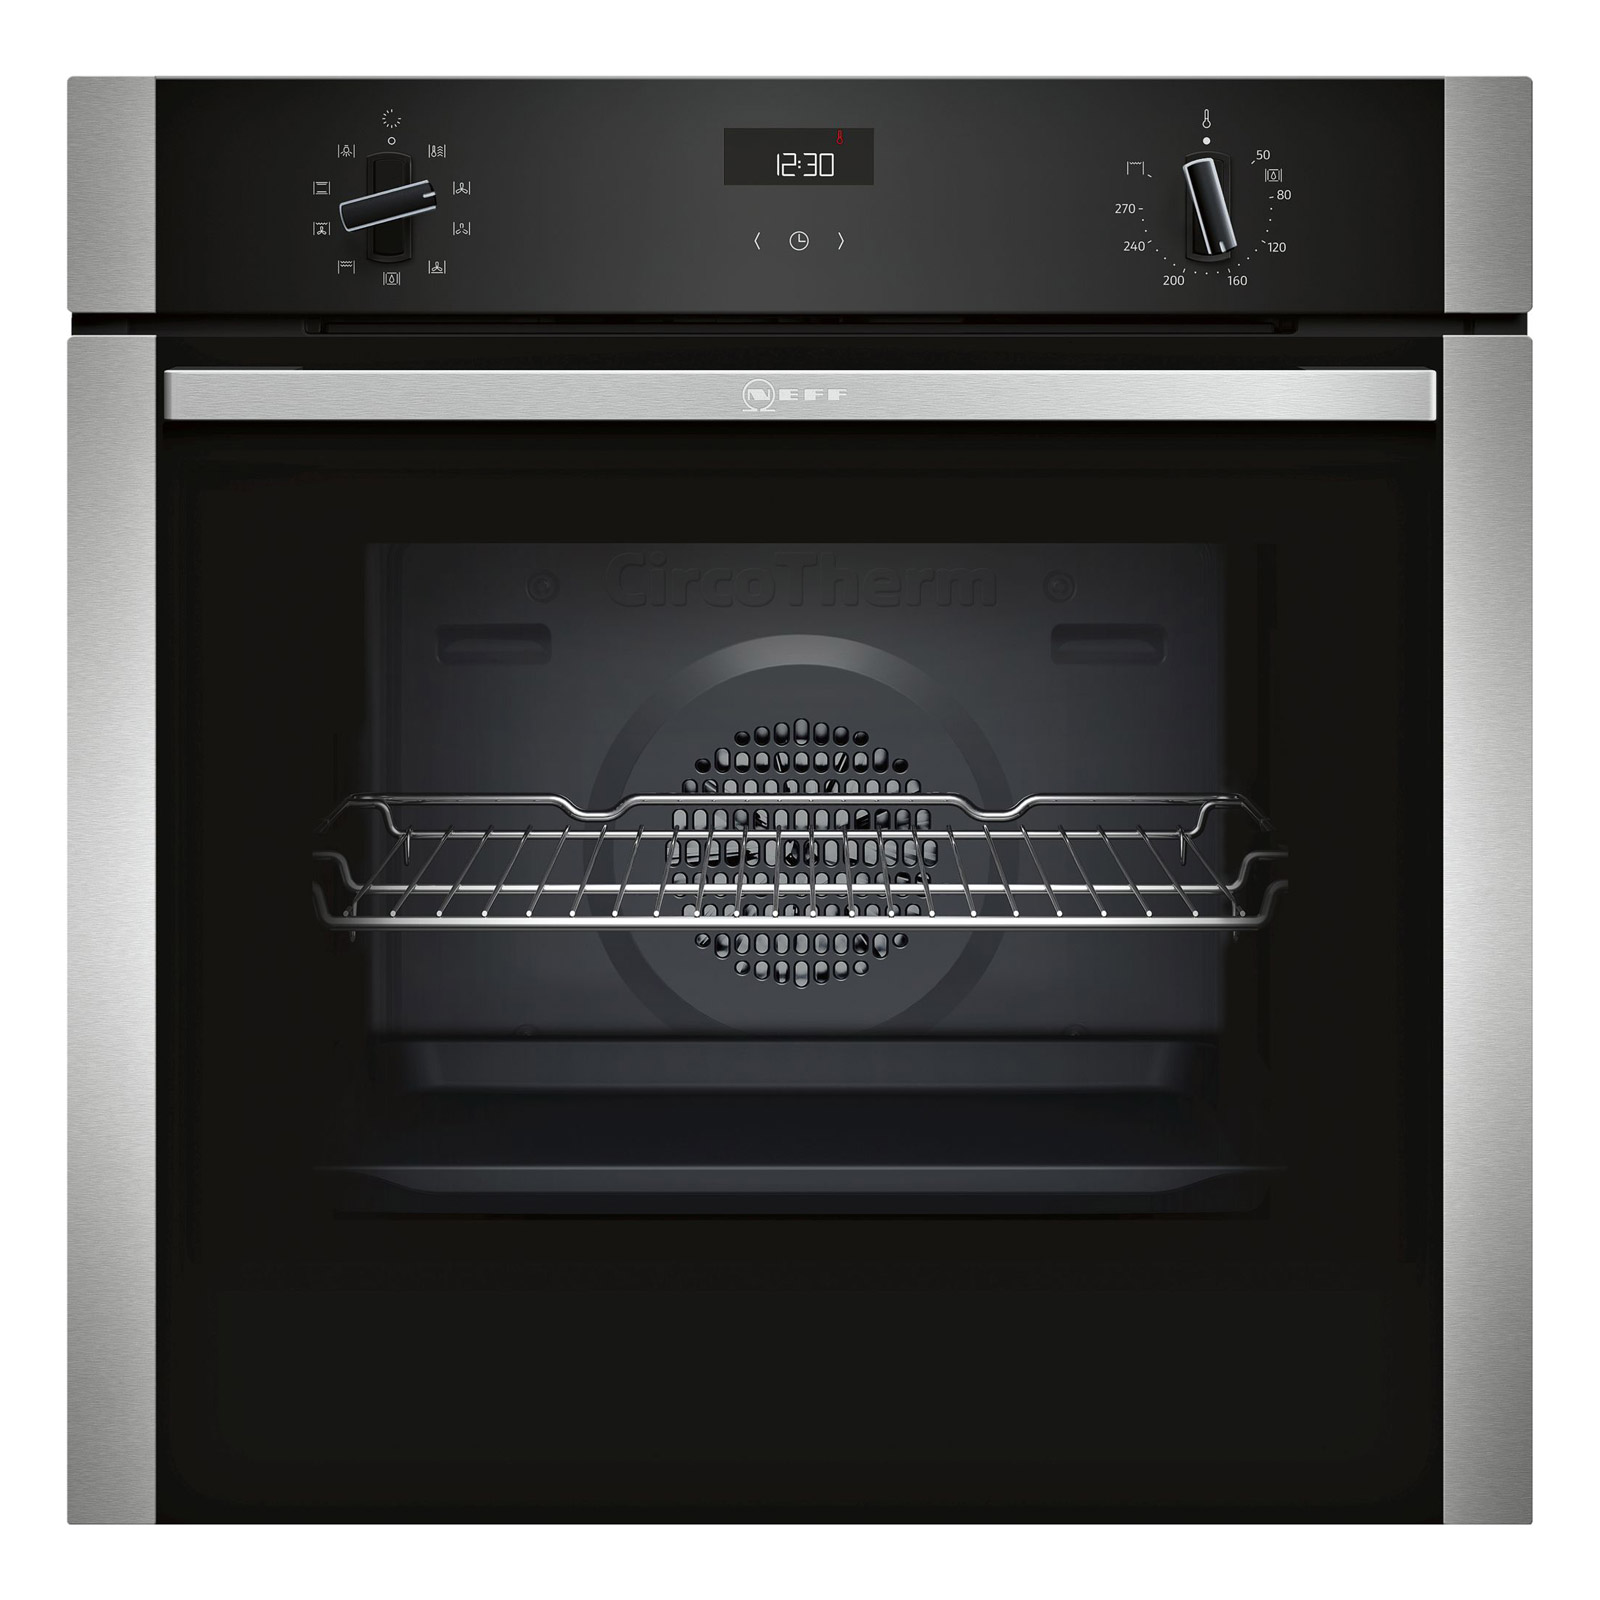 Image of Neff B1ACE4HN0B N50 Built In Electric Single Oven in St Steel 71L